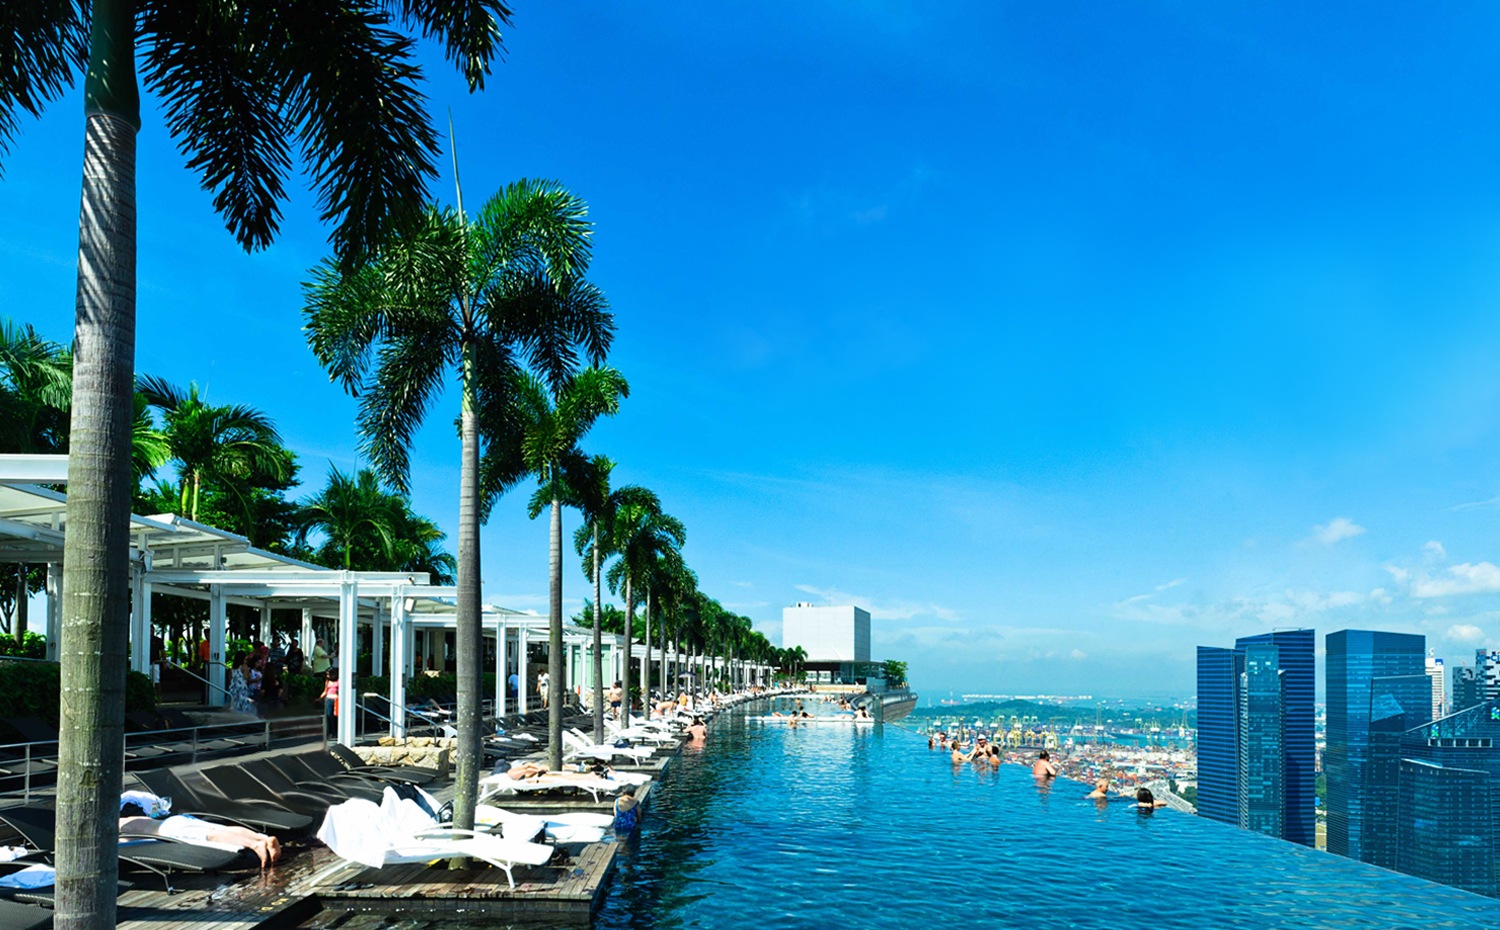 Infinity Pool Day time View at Marina Bay Sands